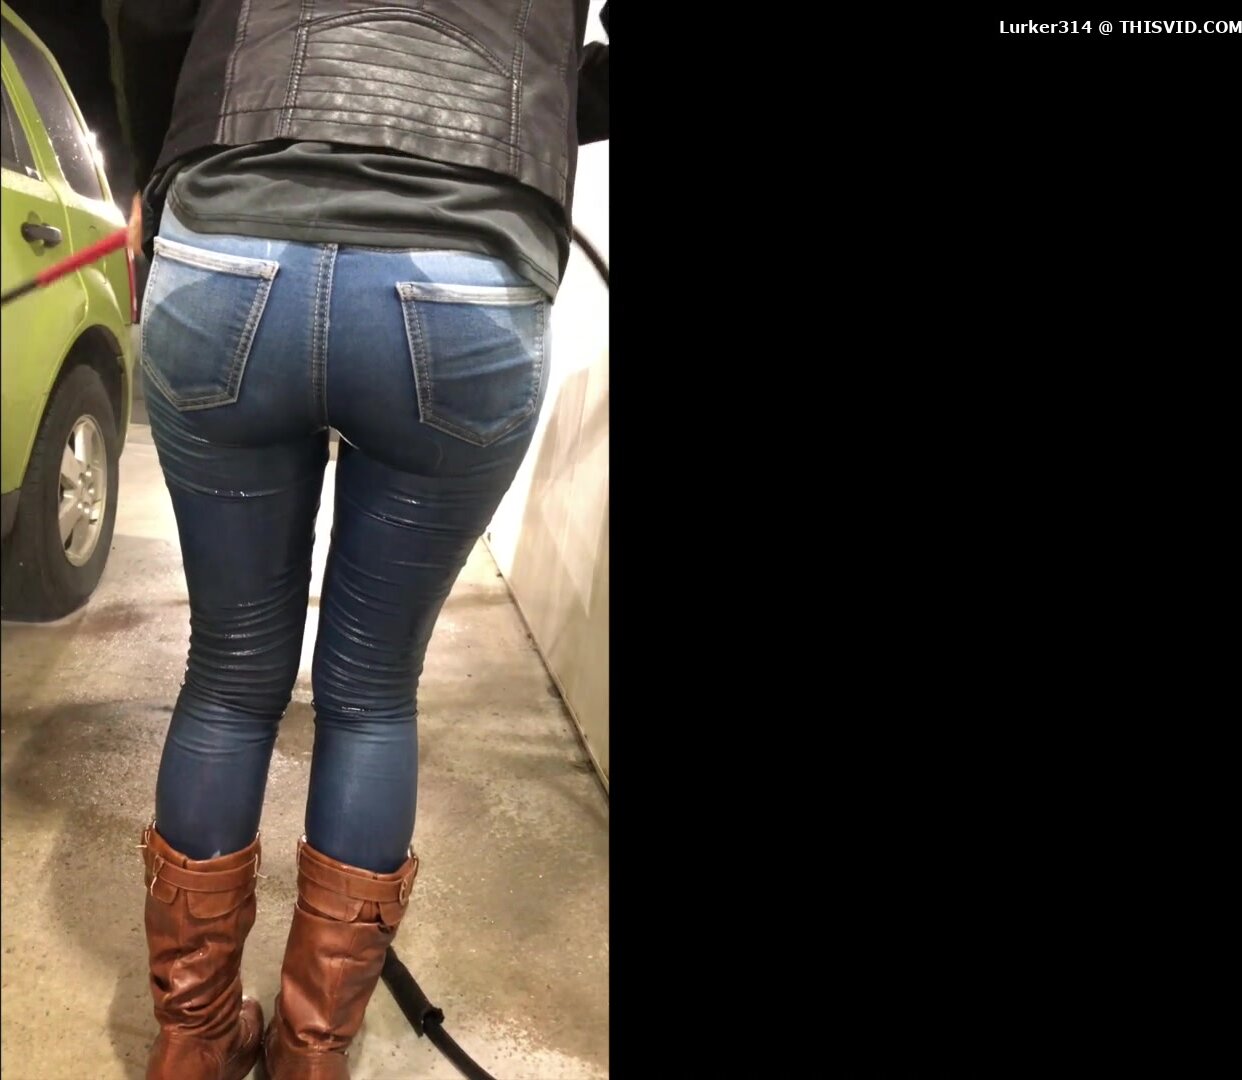 Pissing her jeans while washing car.